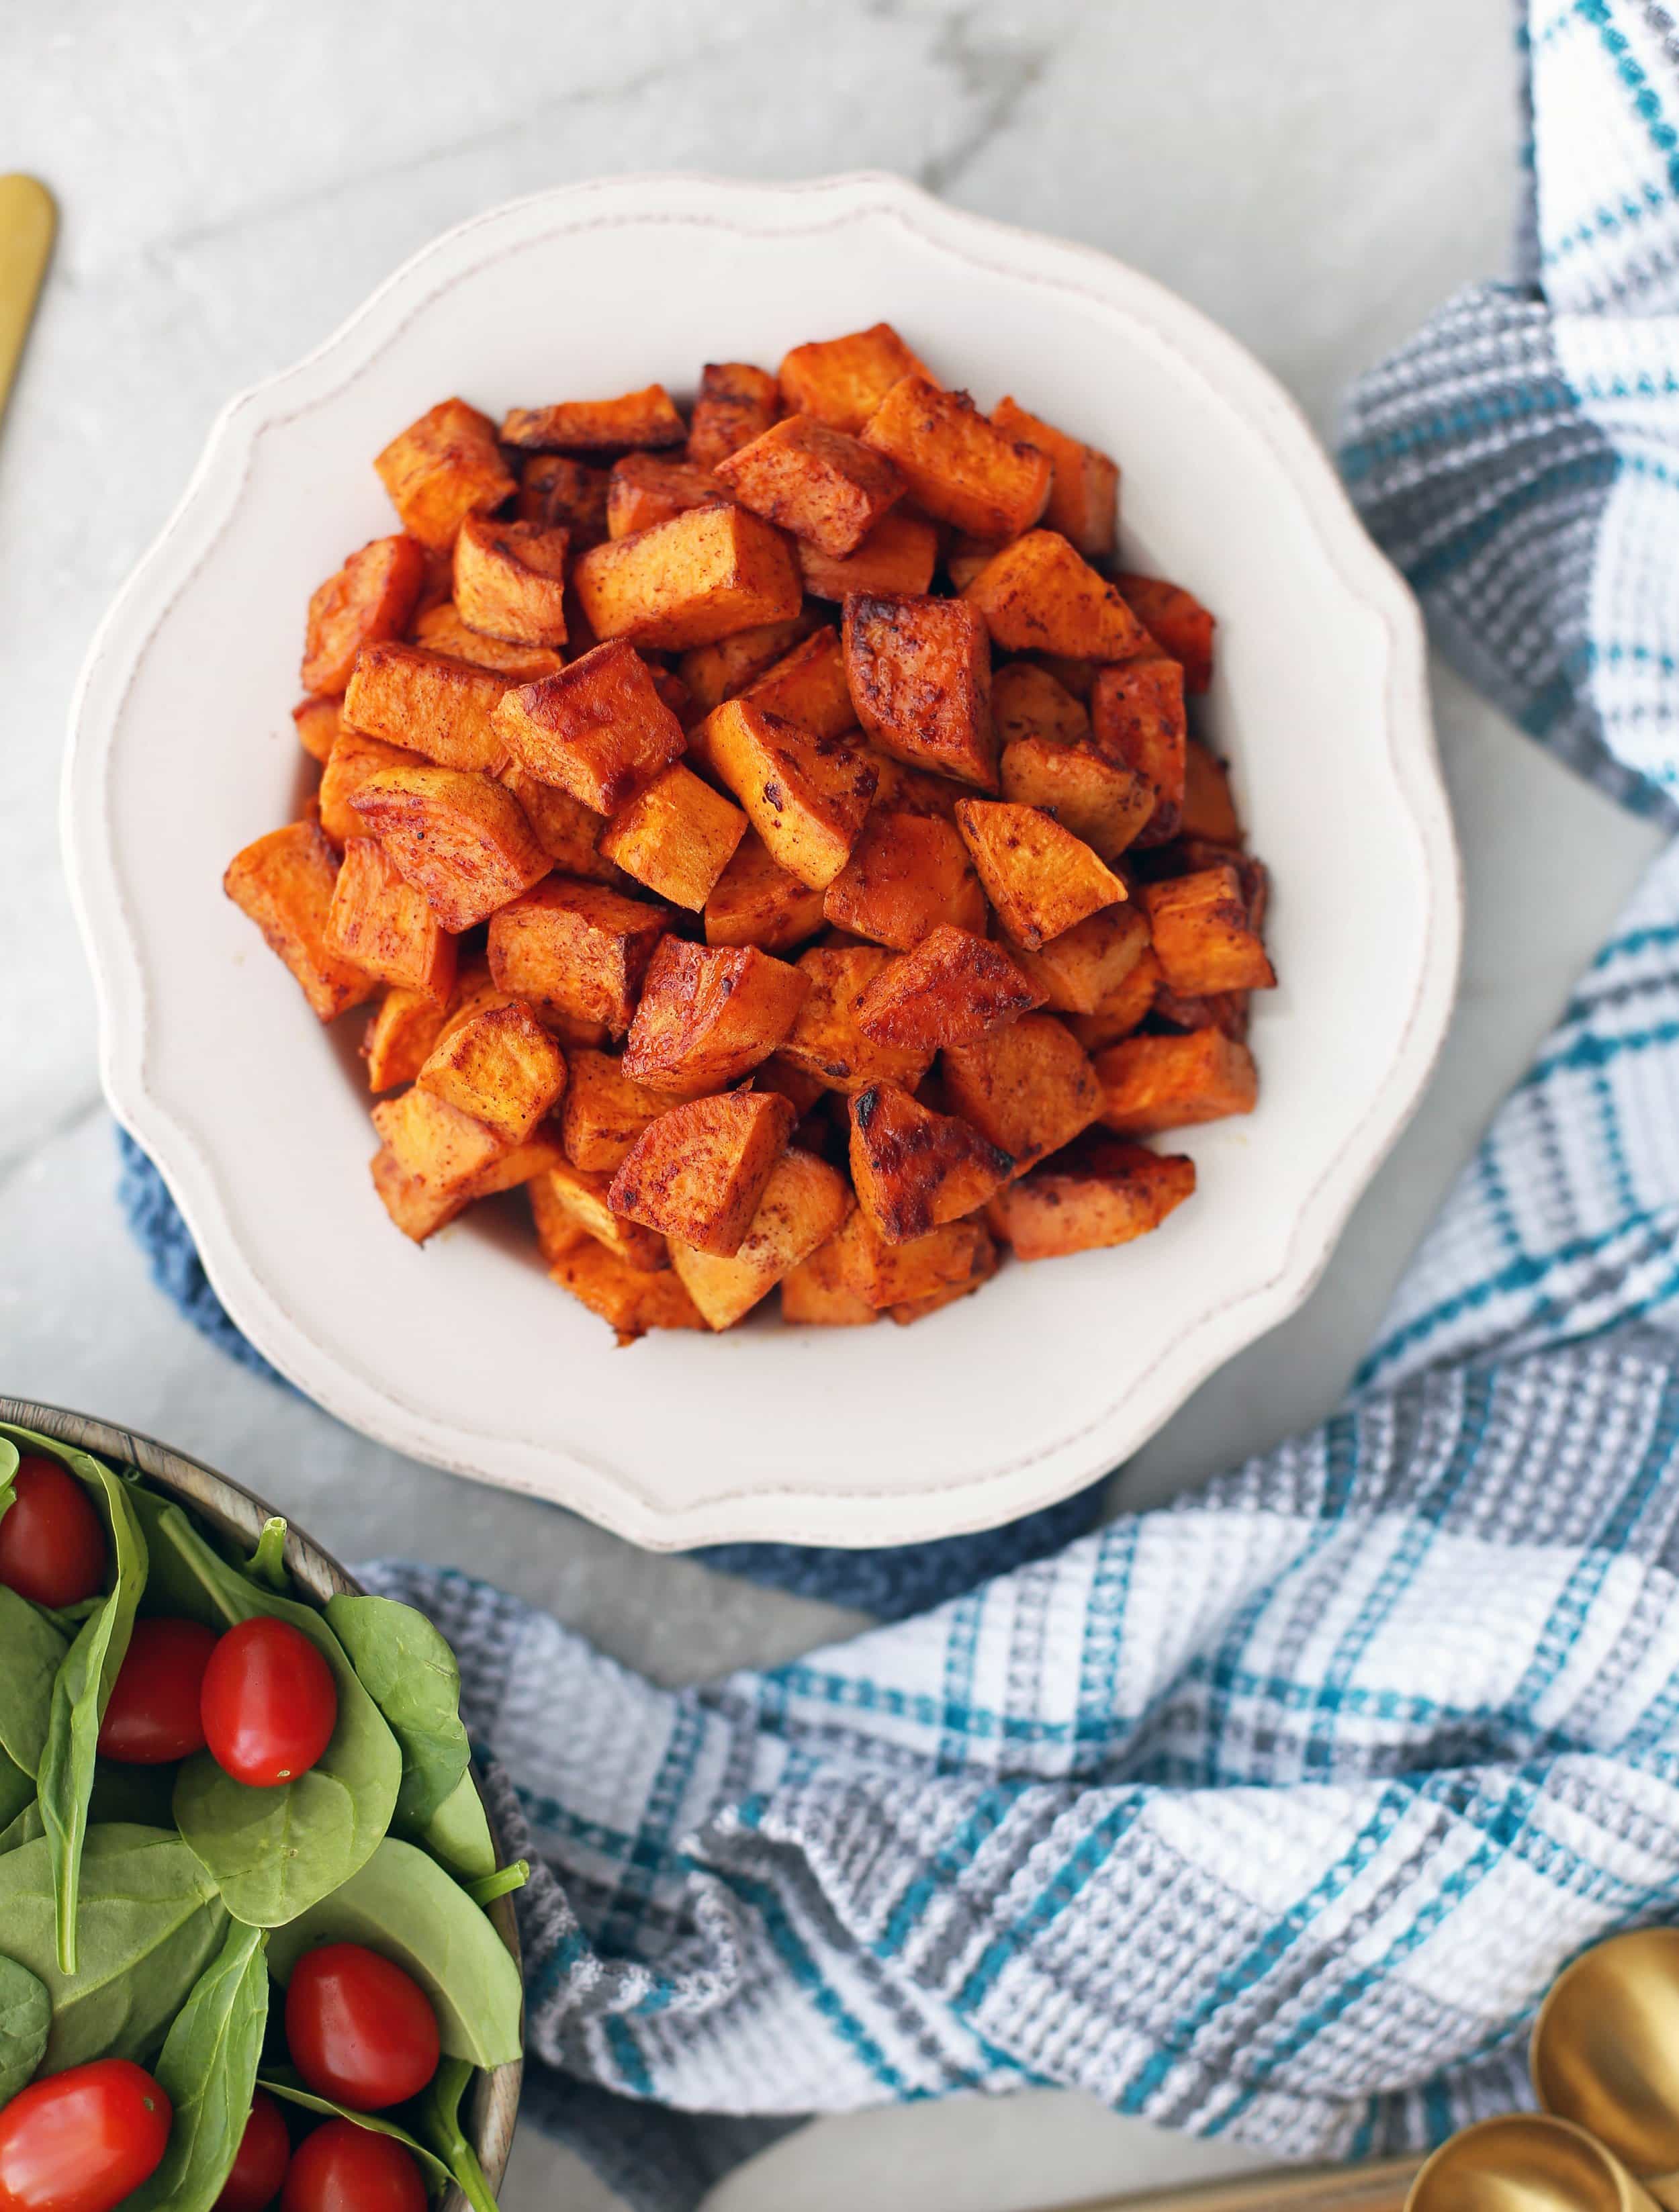 Overhead view of a white bowl containing roasted maple cinnamon sweet potatoes piled high.